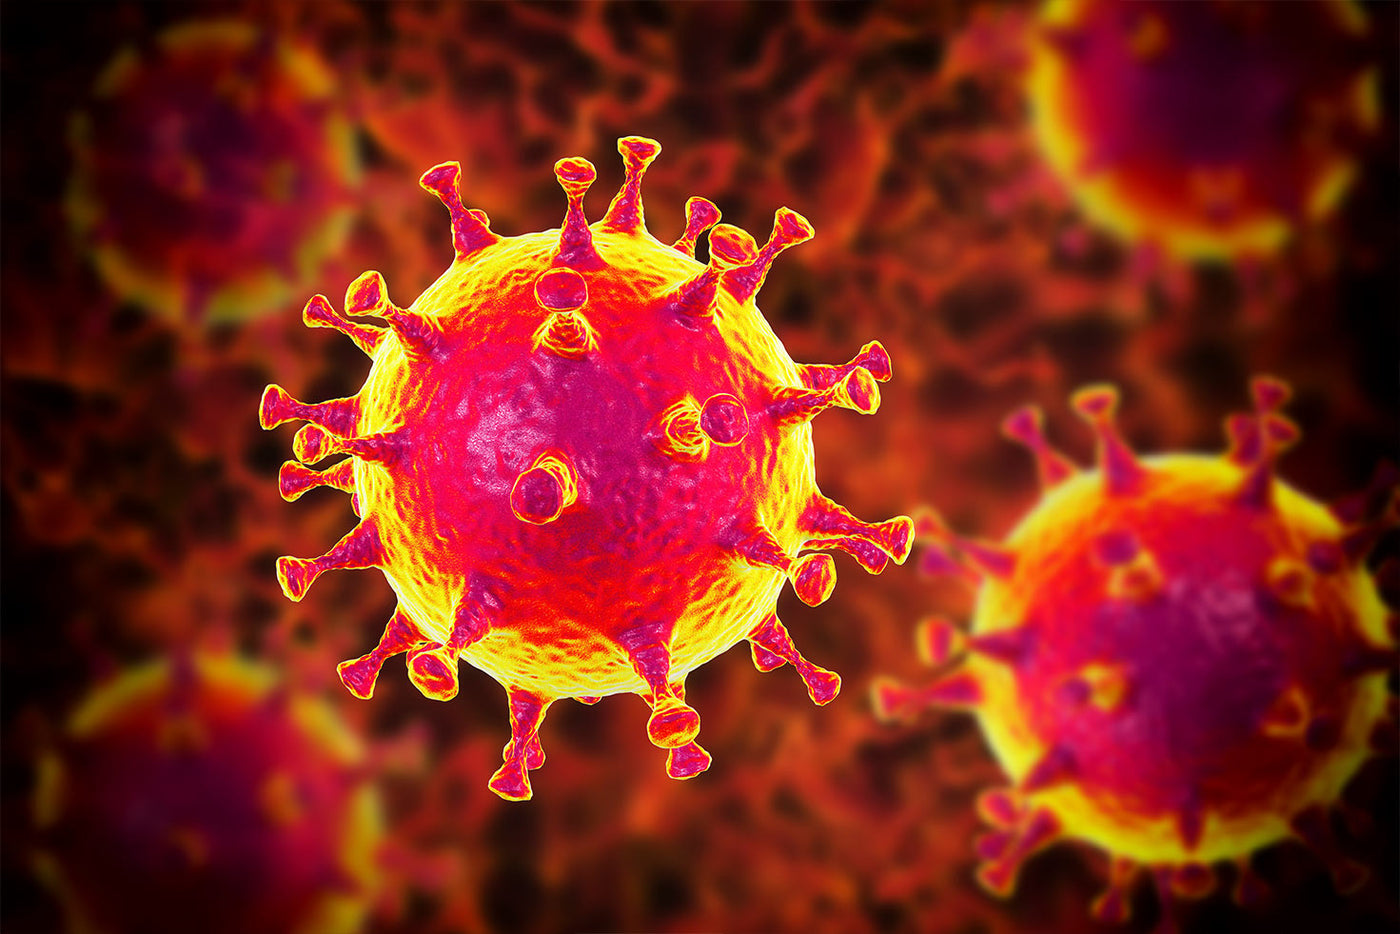 WHAT YOU NEED TO KNOW ABOUT THE CORONAVIRUS - MJ SUNSHINE